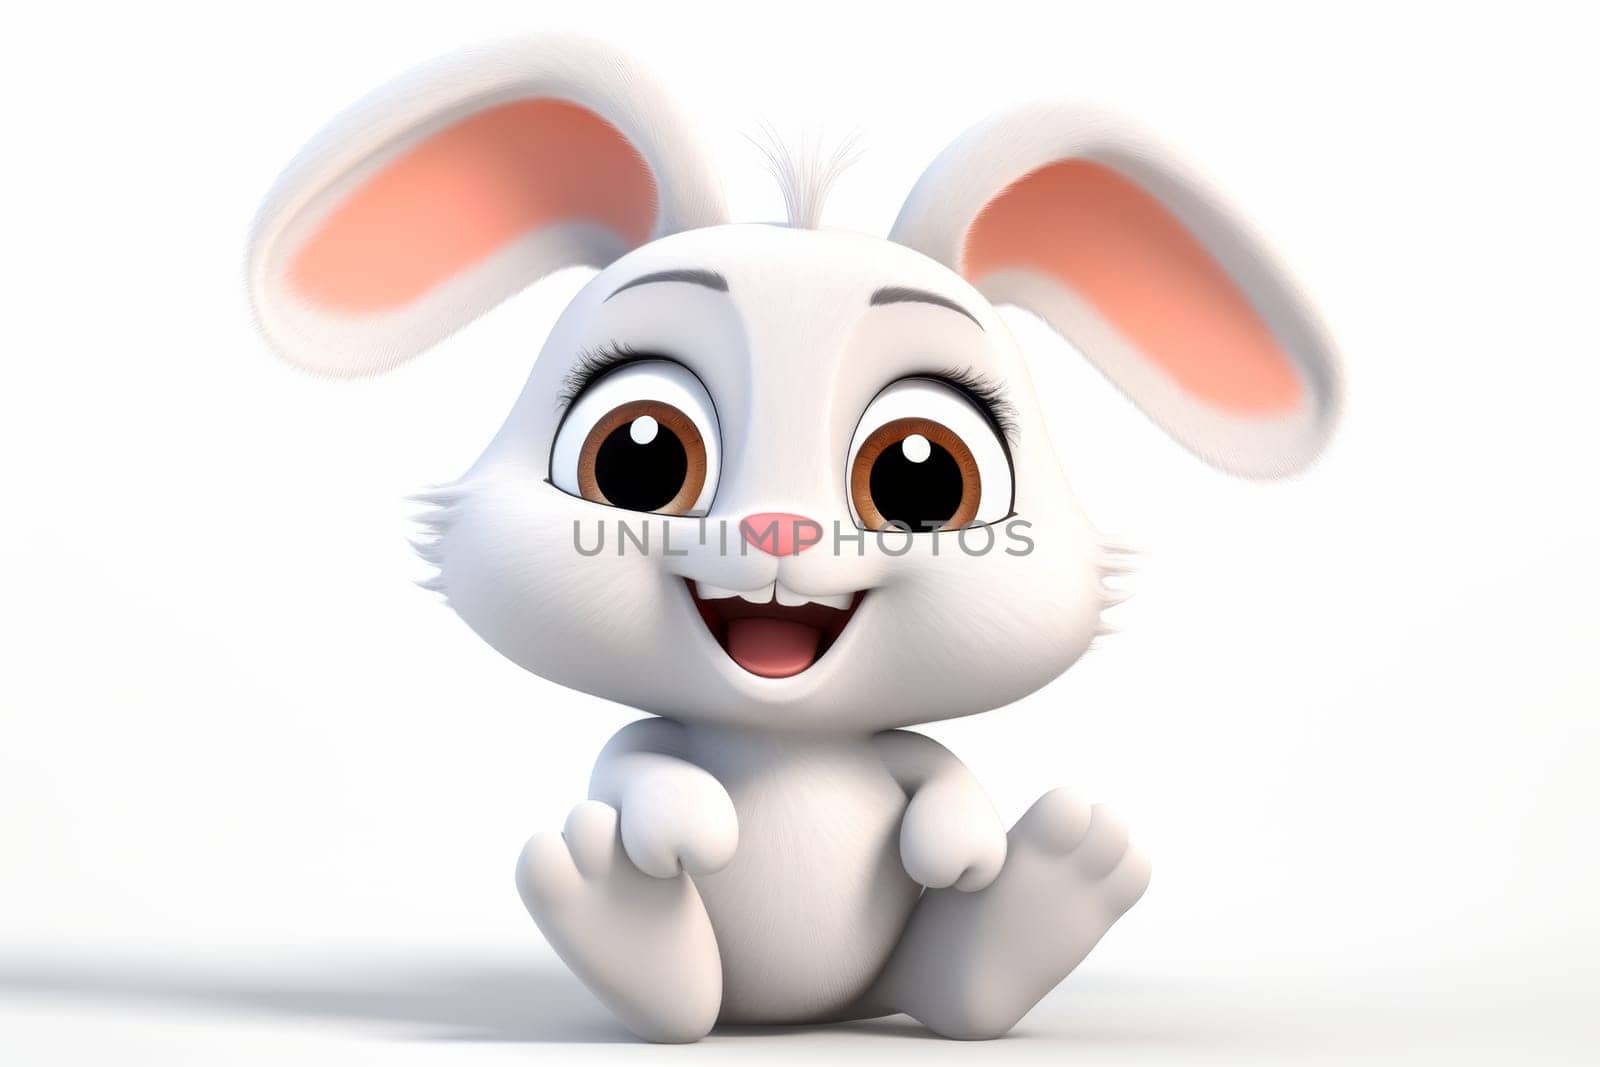 Cute cartoon white rabbit isolated on a white background. 3d illustration.